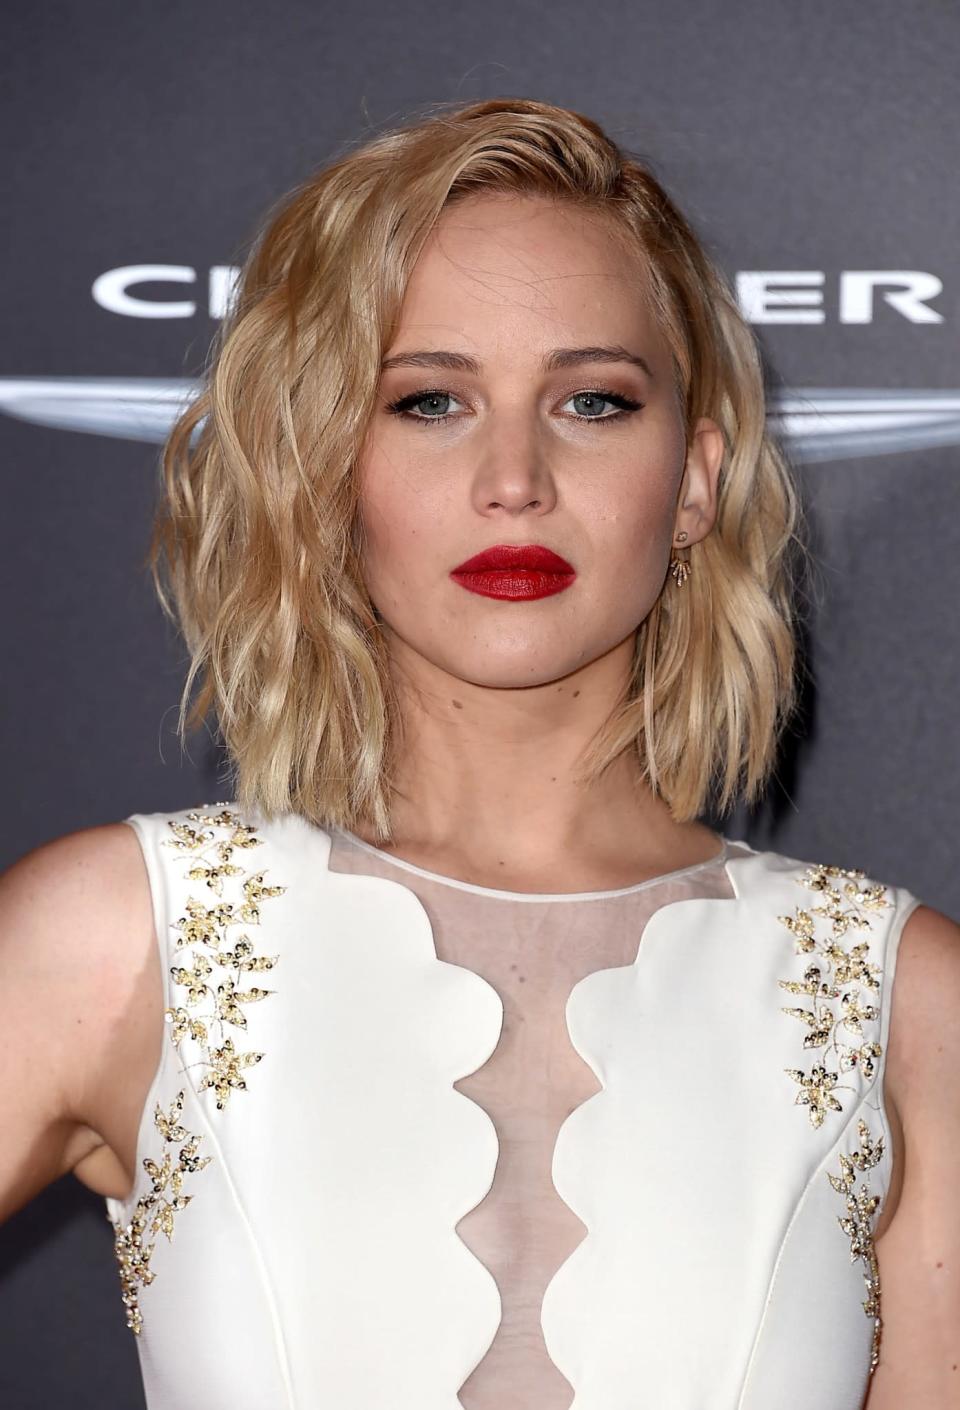 <p>The actress was the splitting image of ‘Mad Men’ star January Jones, thanks to bold red lipstick and tousled blonde cropped locks at a ‘The Hunger Games: Mockingjay Part 2’ premiere. [Photo: Getty] </p>